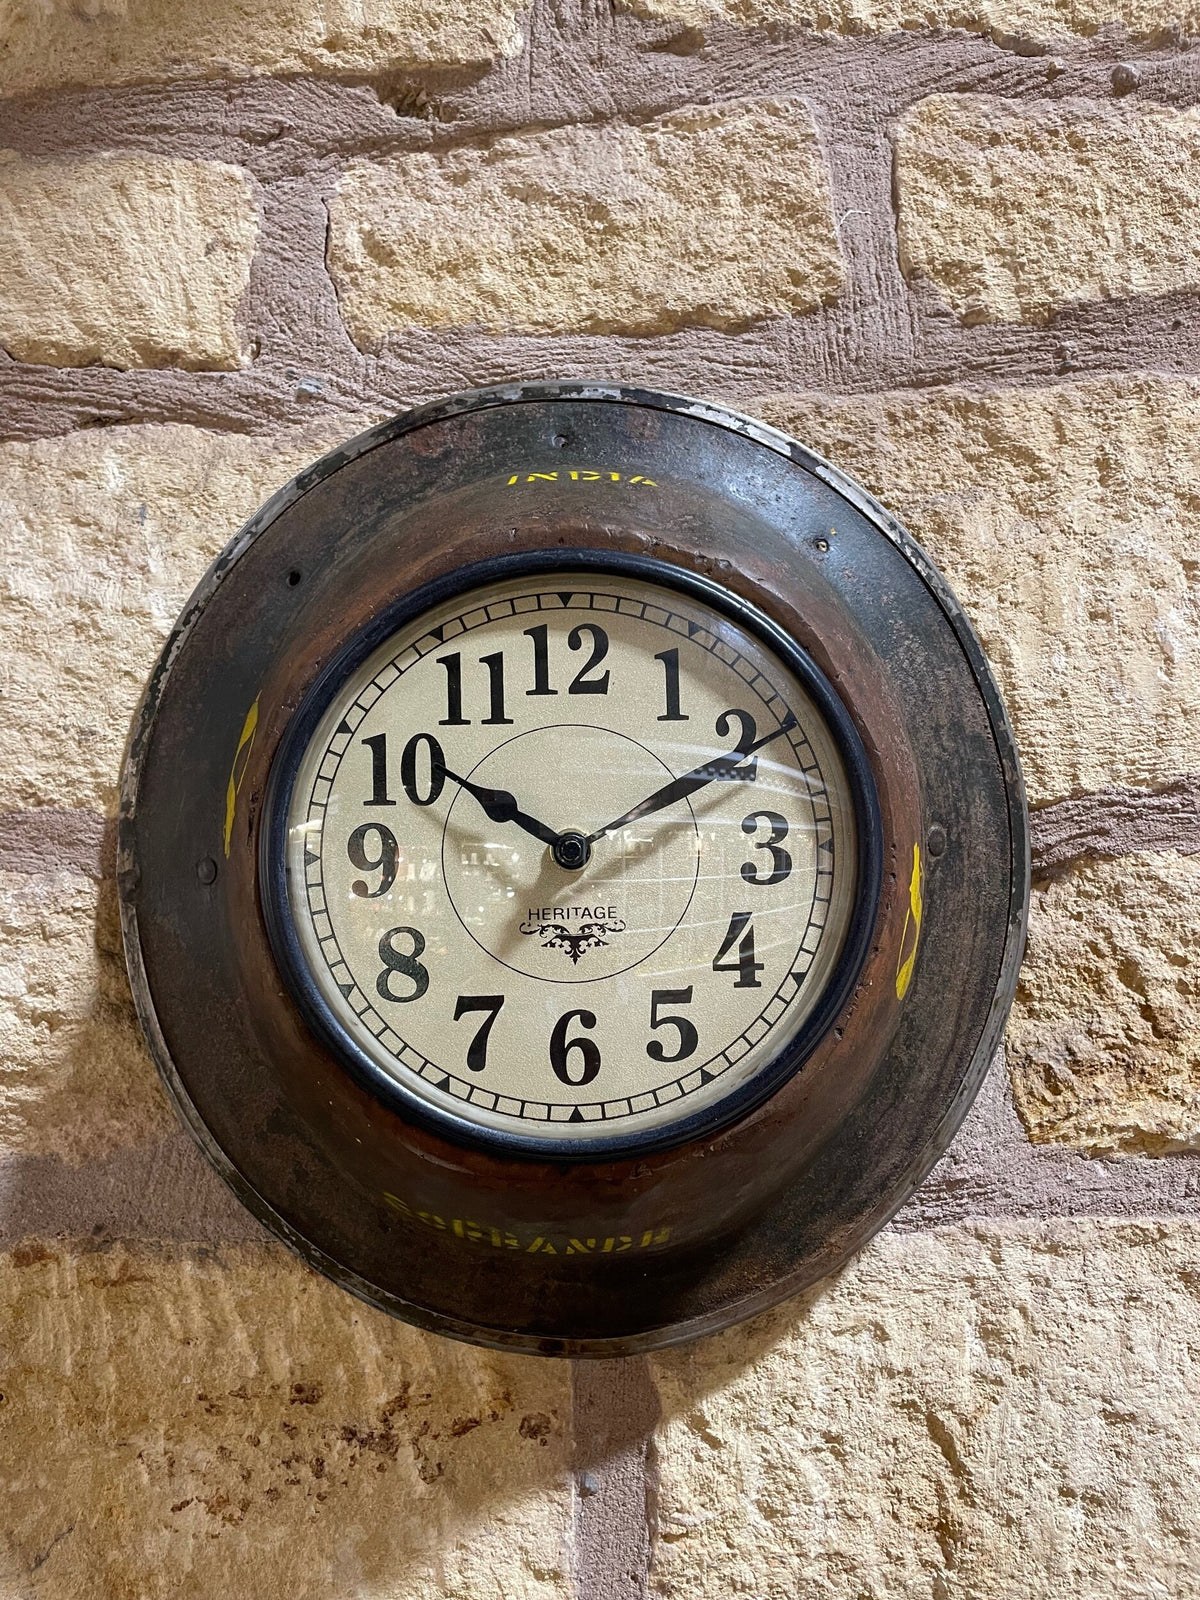 Upcycled Indian Army Helmet Clock